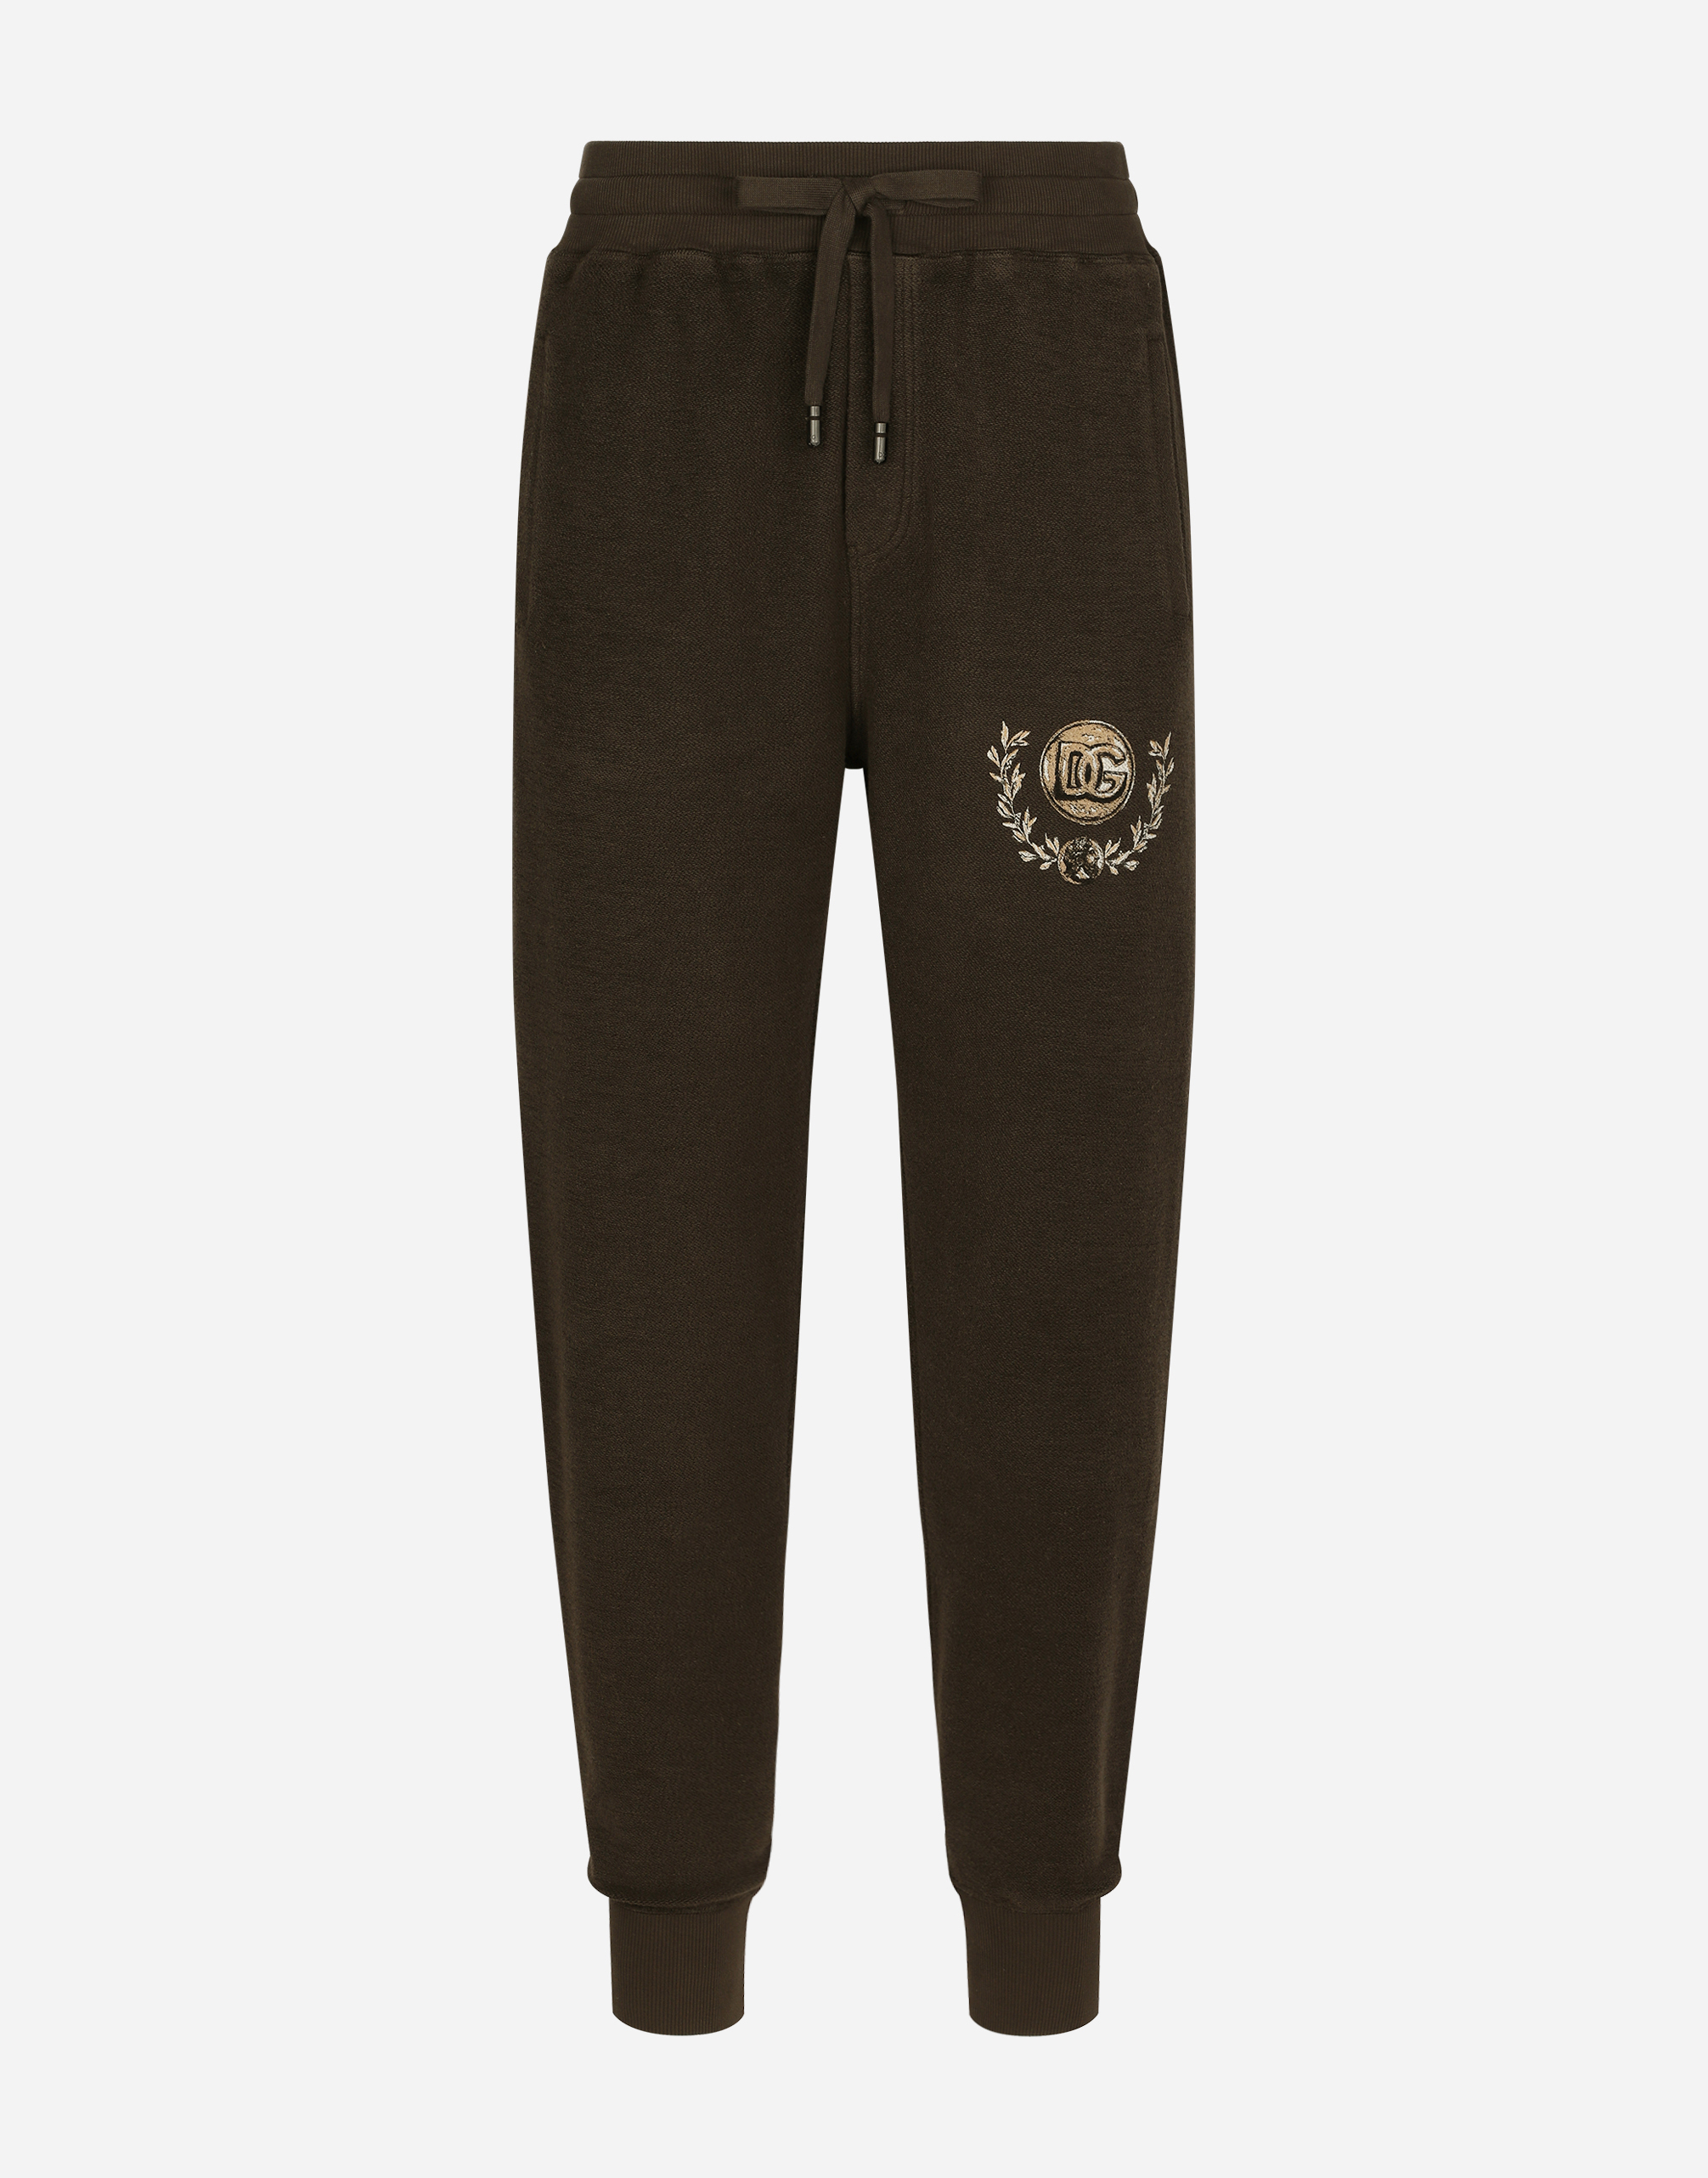 Jersey jogging pants with DG coin print in Brown